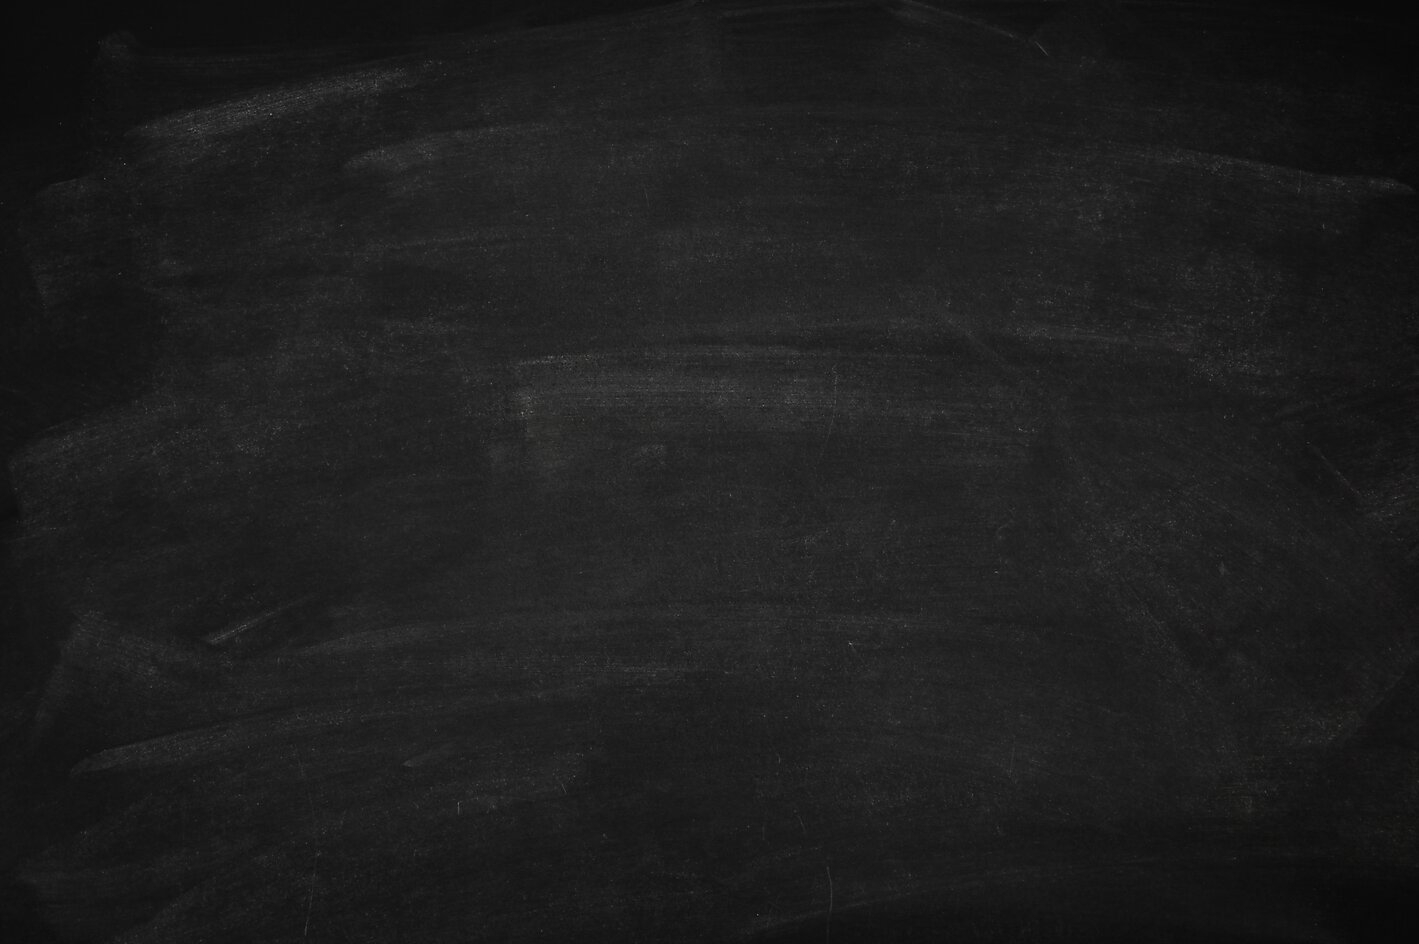 Background of a chalkboard with faint eraser marks.